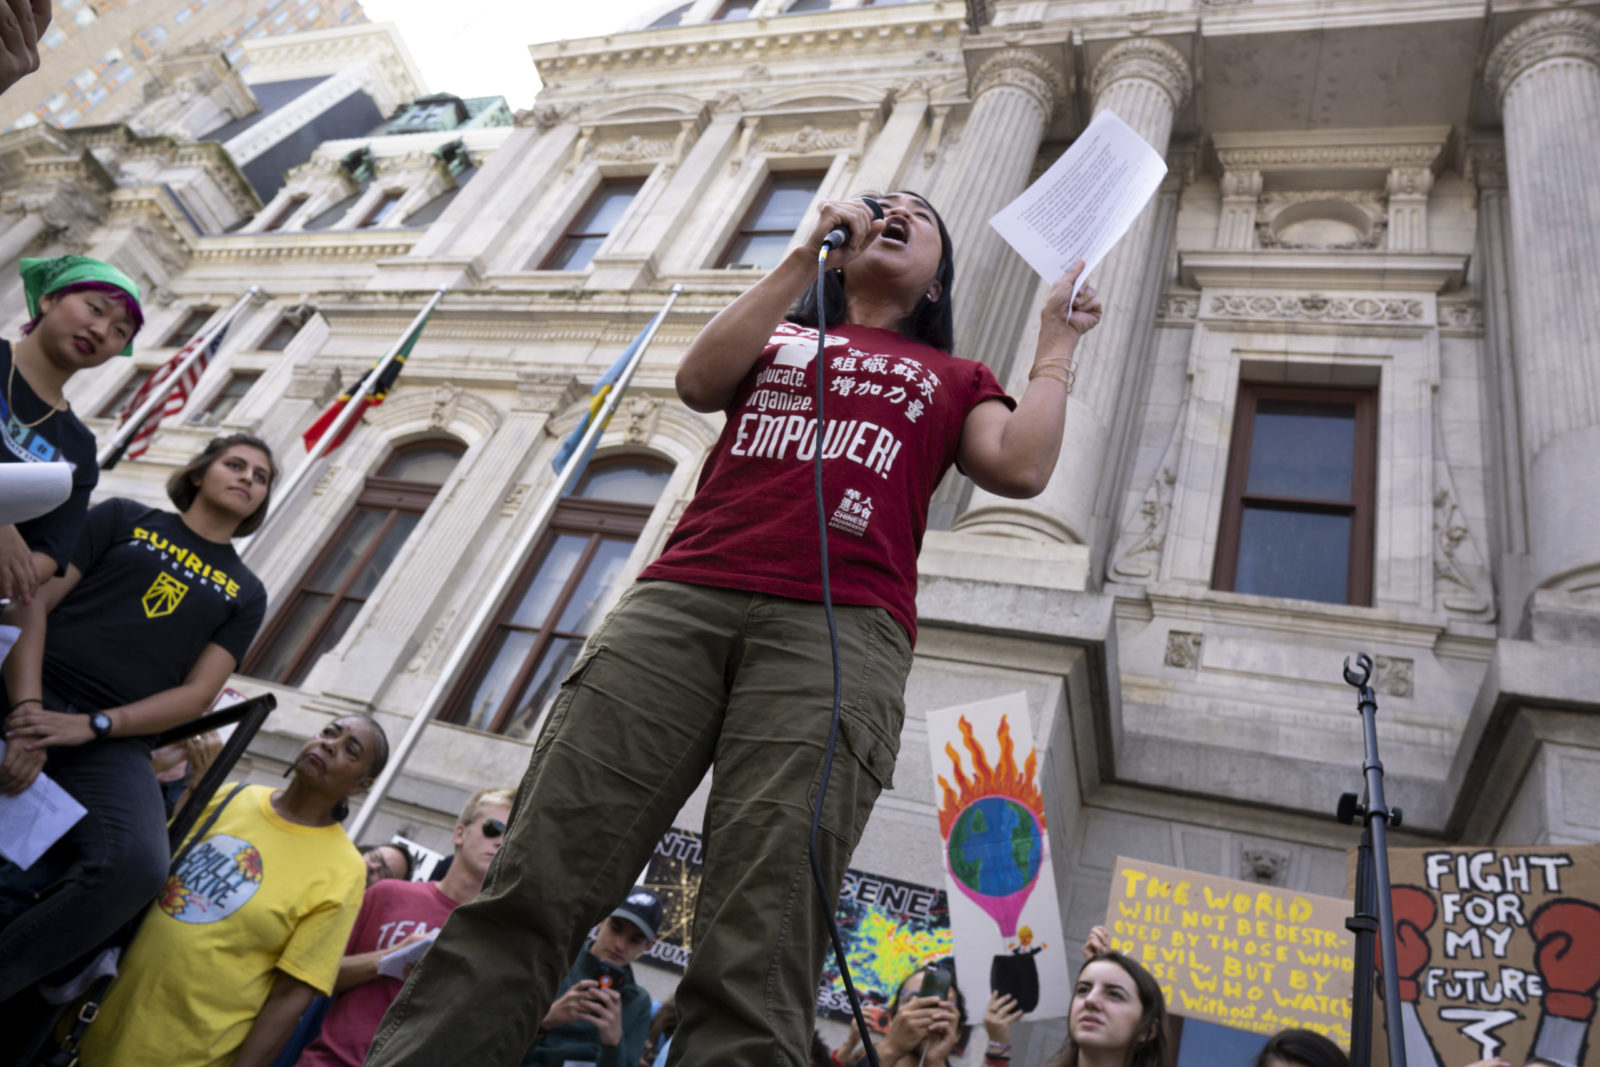 An activist gives a speech during the An activist holds a sign saying "La carne no es ecologica" during the September 2019 Climate Strike.